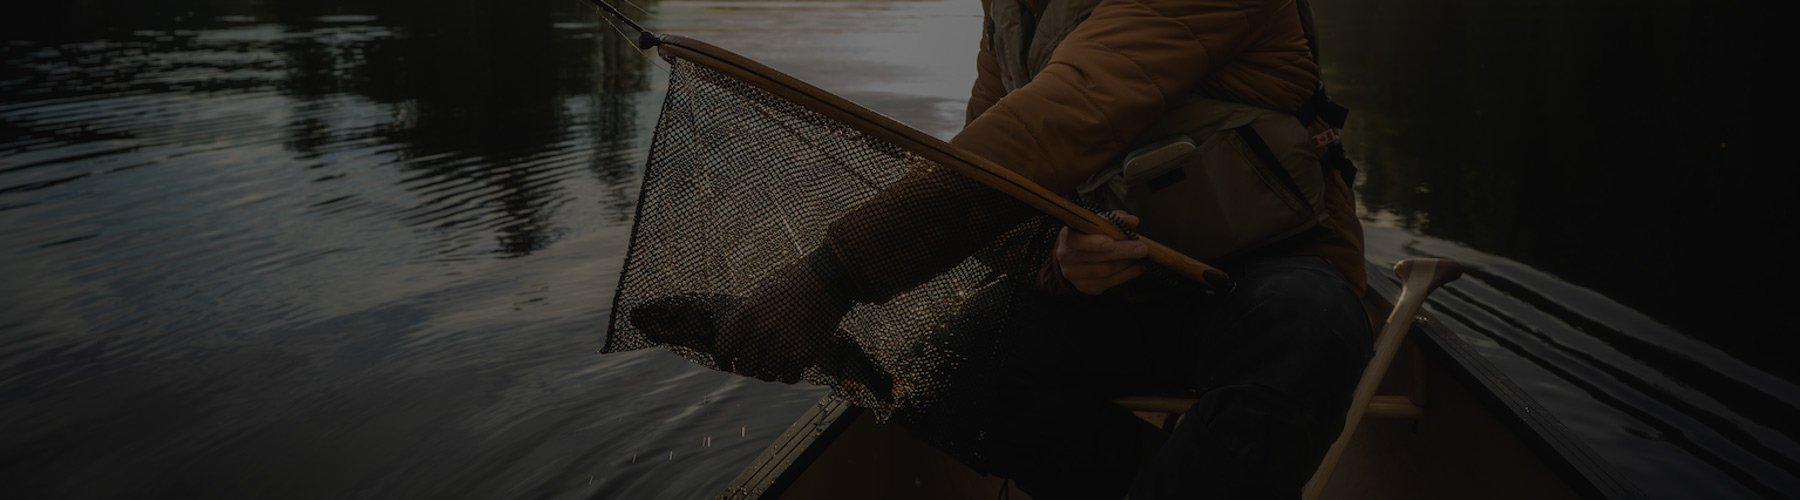 Man fishing in a canoe with a fish in his net